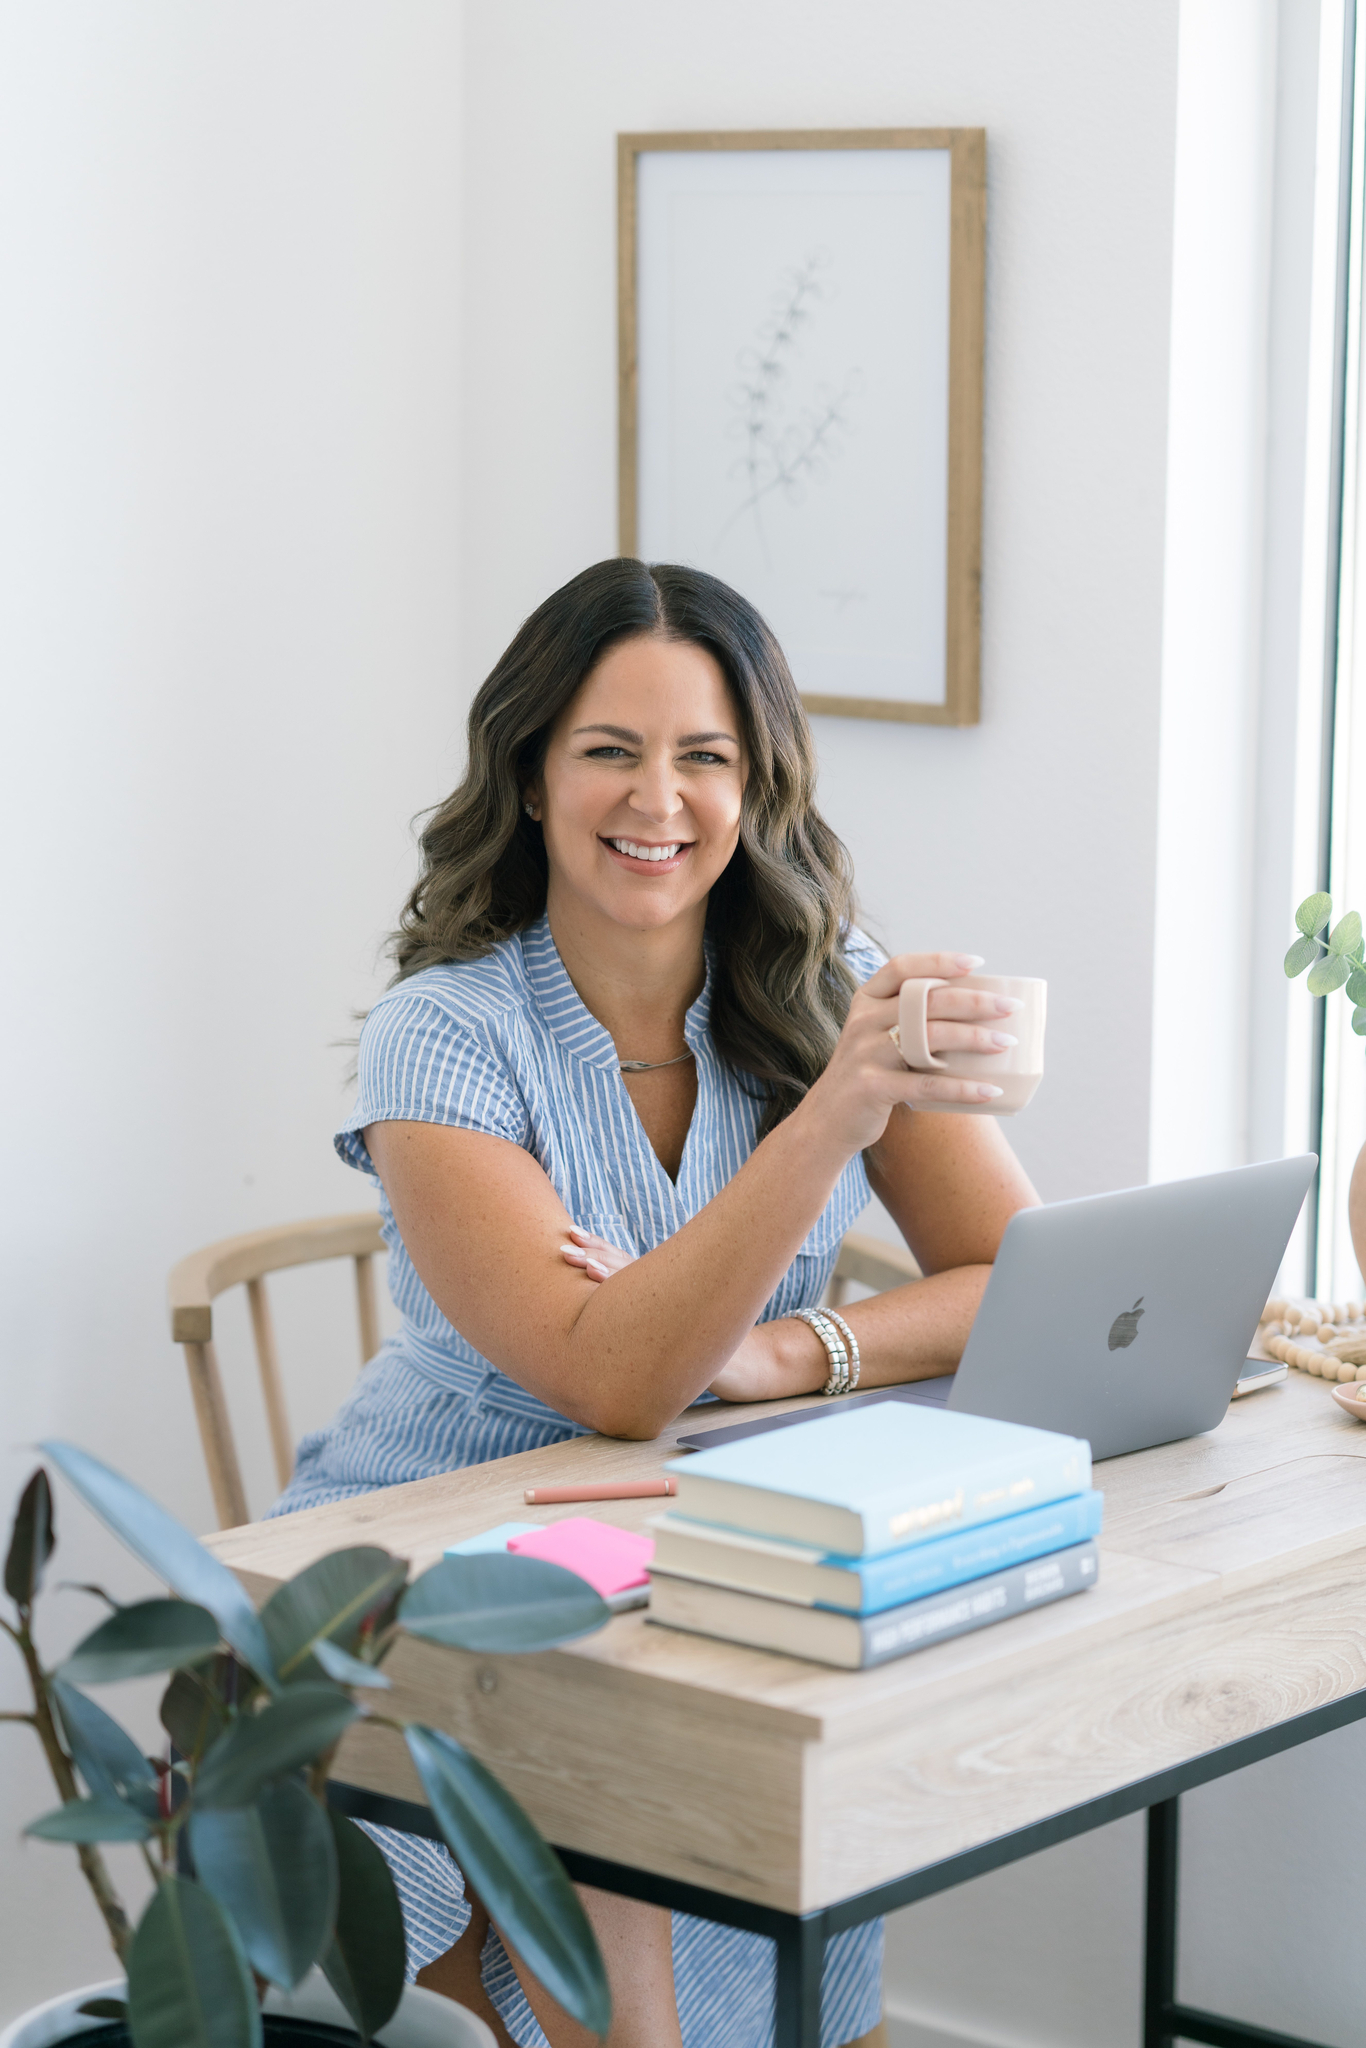 Shayla King, executive life coach looks up from her laptop and smiles while holding a cup of coffee